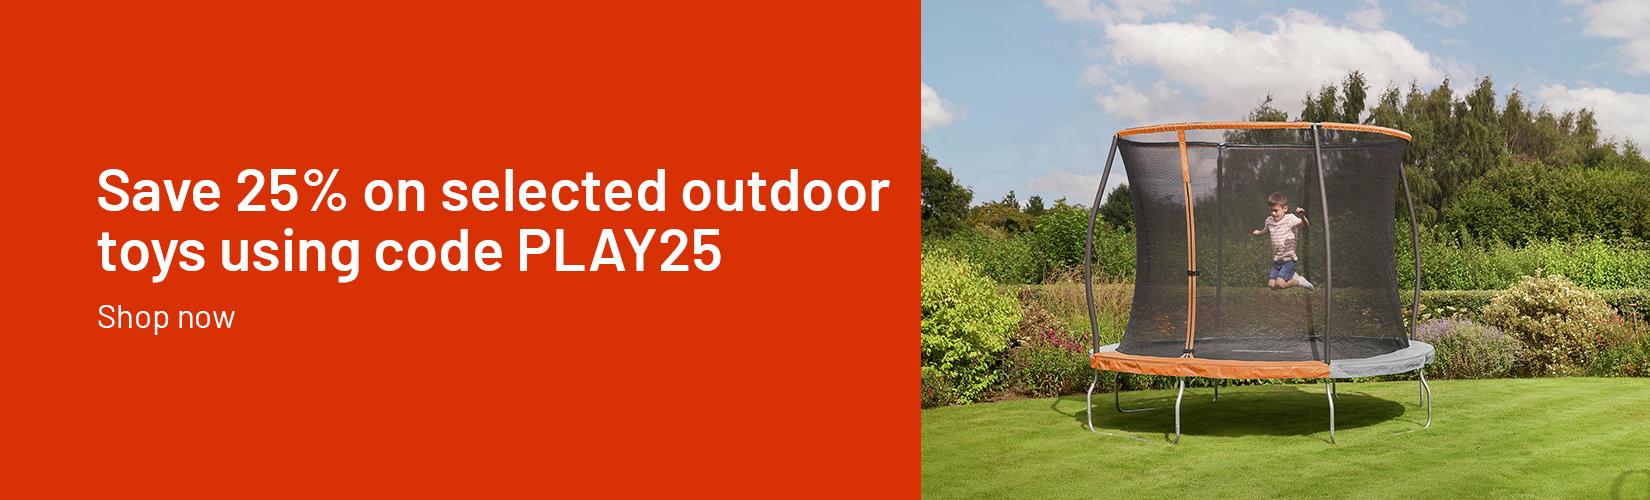 Save 25% on selected outdoor toys using code PLAY25! Shop now.